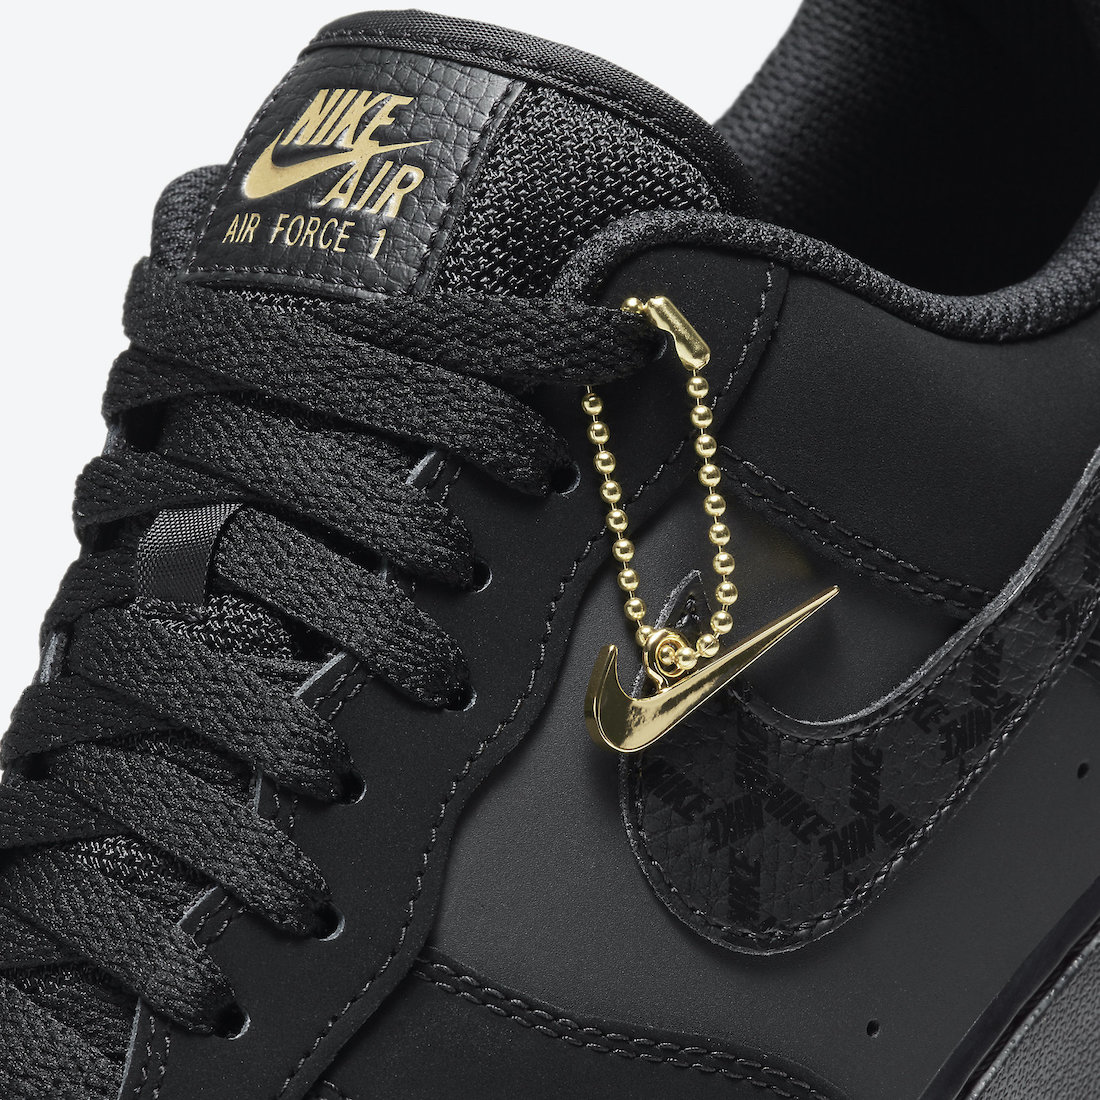 black and gold air force 1 low